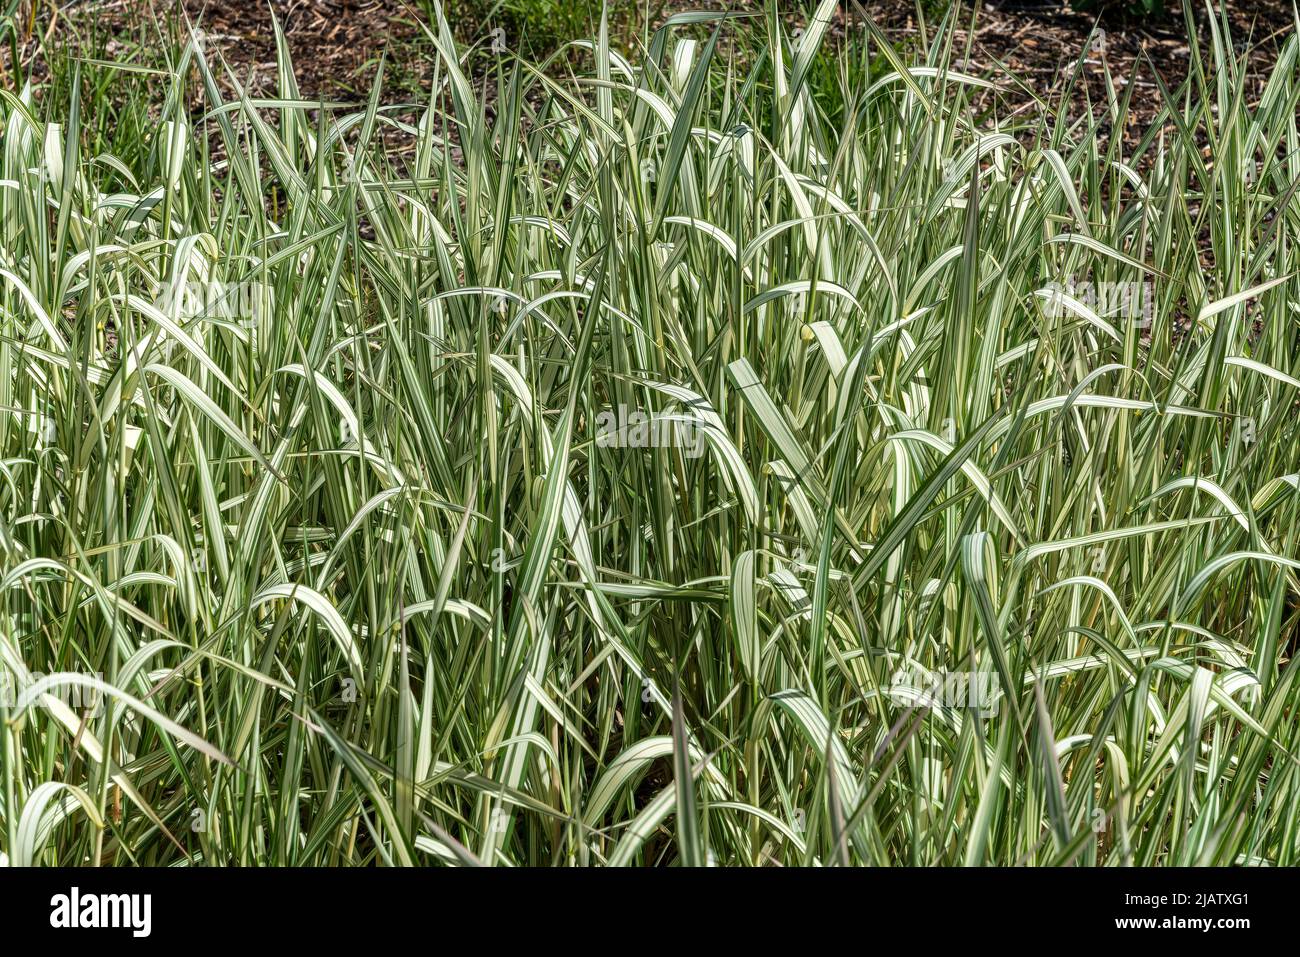 Phalaris arundinacea var picta 'Feesey' a perennial striped grass plant commonly known as Ribbon Grass or Gardener's Garters, stock photo image Stock Photo